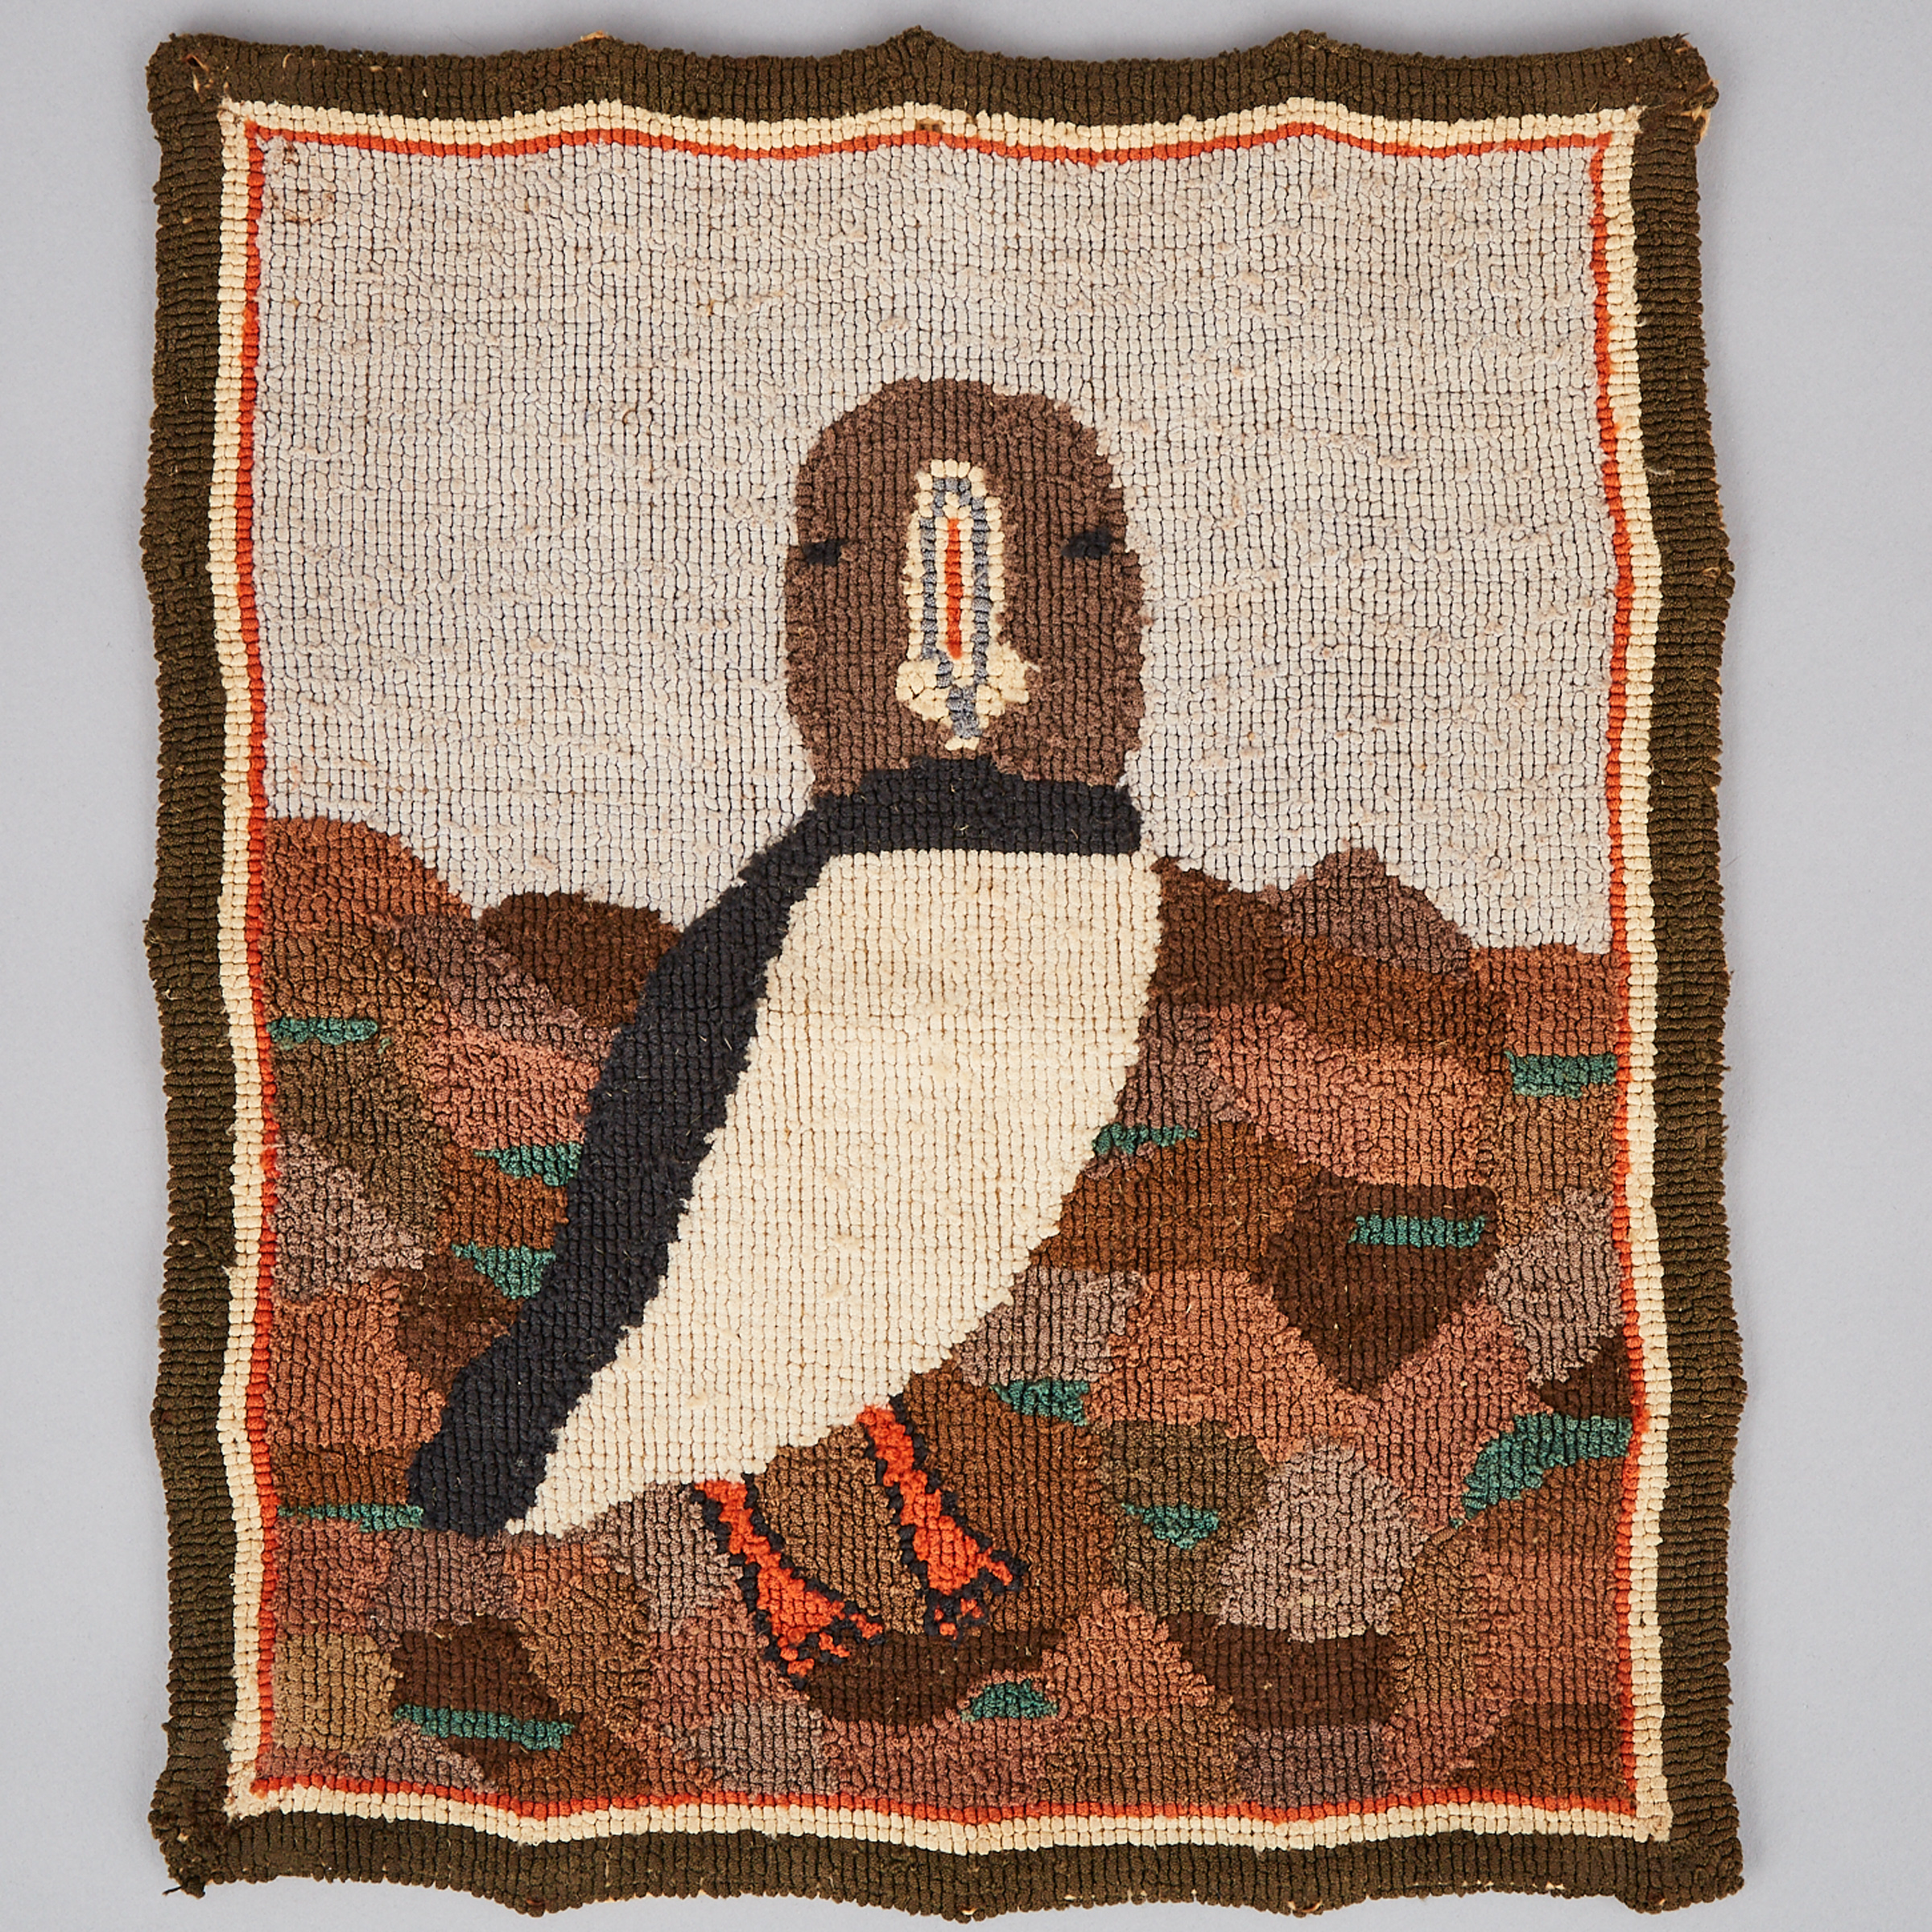 Grenfell Labrador Industries Hooked Mat Depicting a Puffin, c.1930